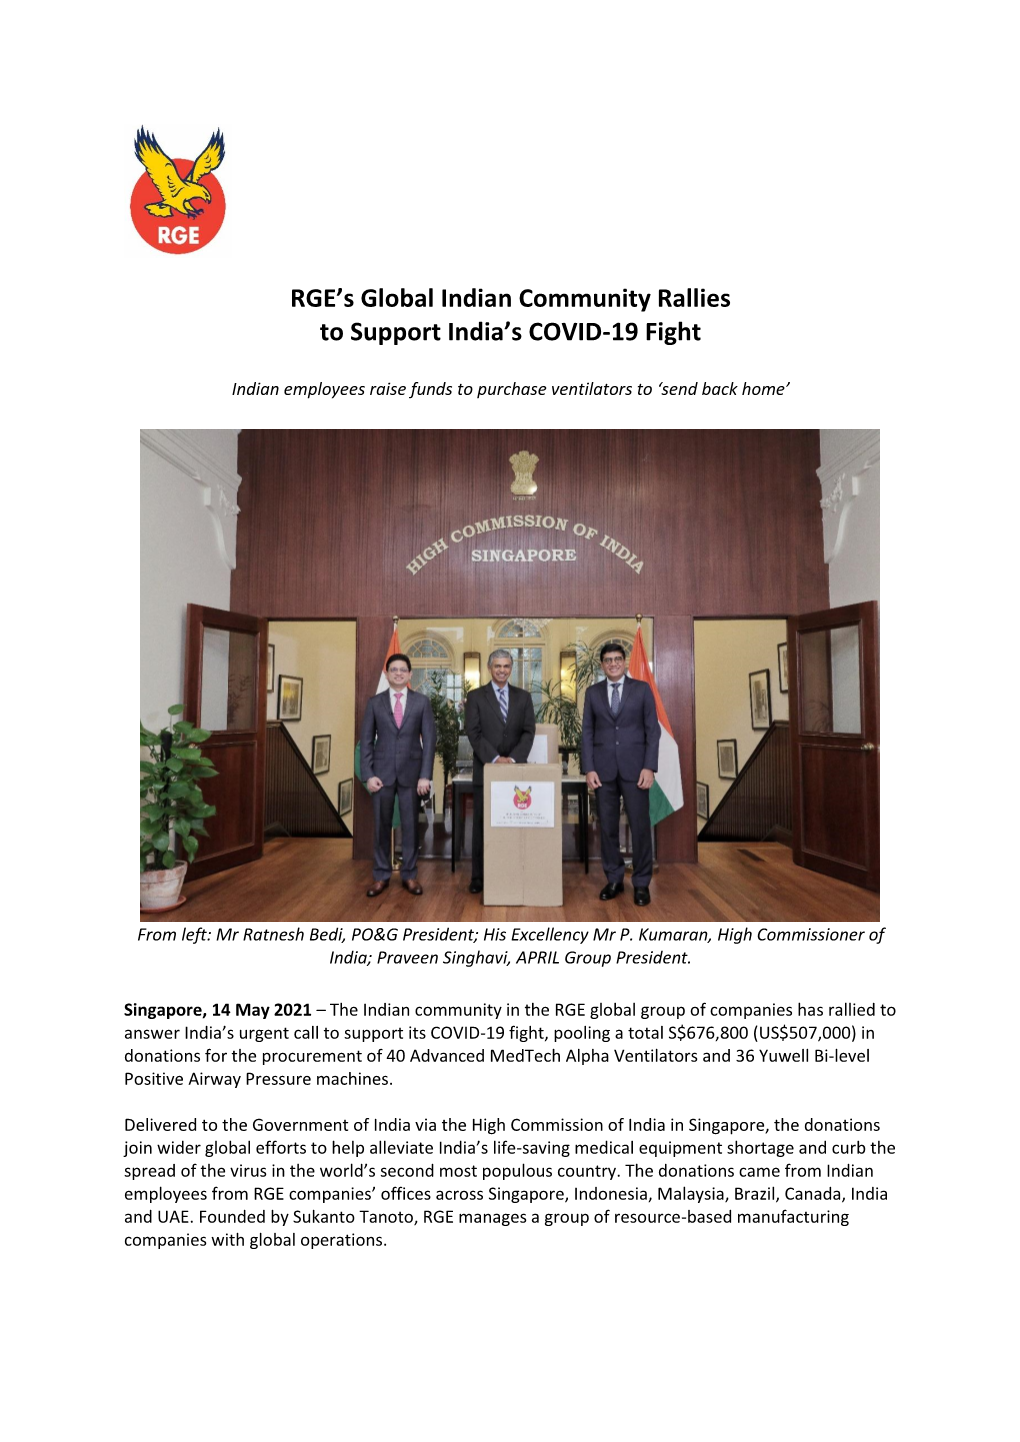 RGE's Global Indian Community Rallies to Support India's COVID-19